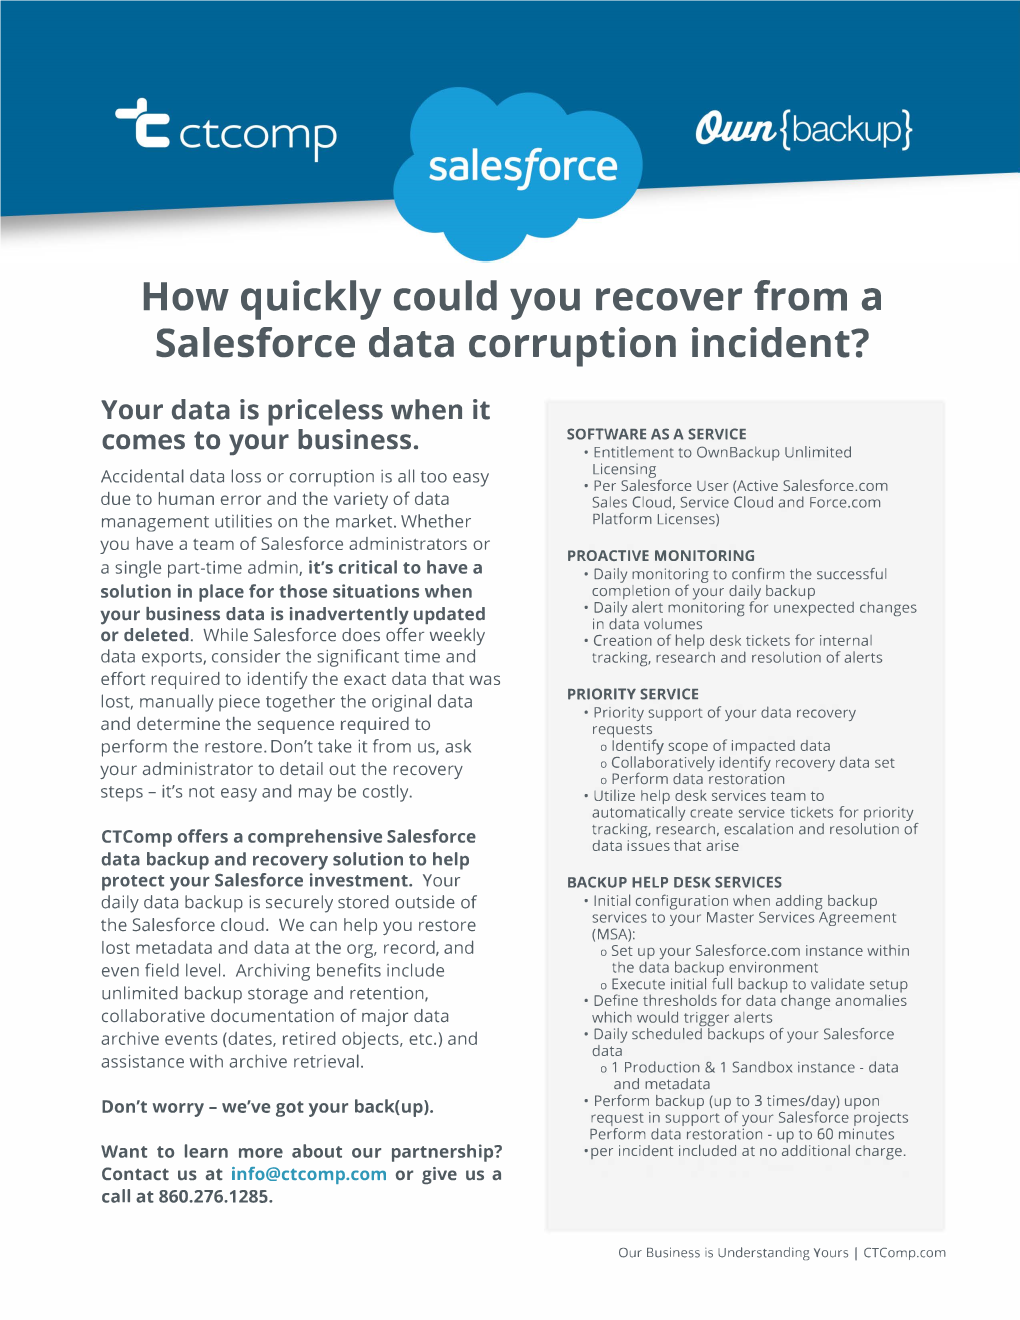 How Quickly Could You Recover from a Salesforce Data Corruption Incident?